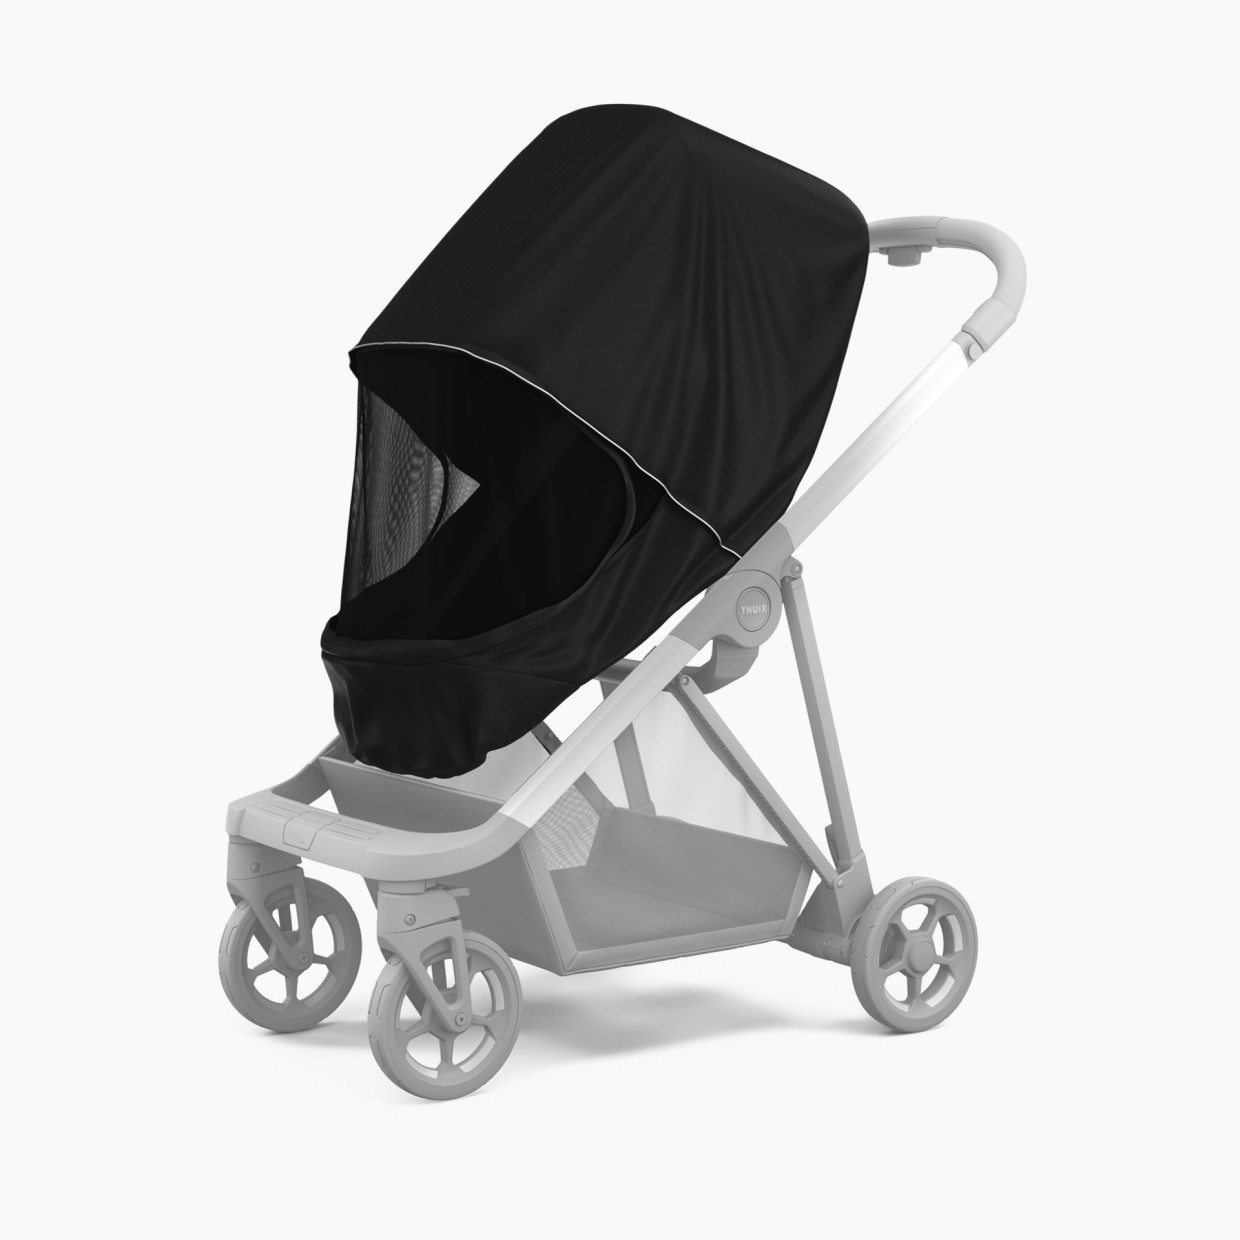 Thule All-Weather Stroller Cover - Black.